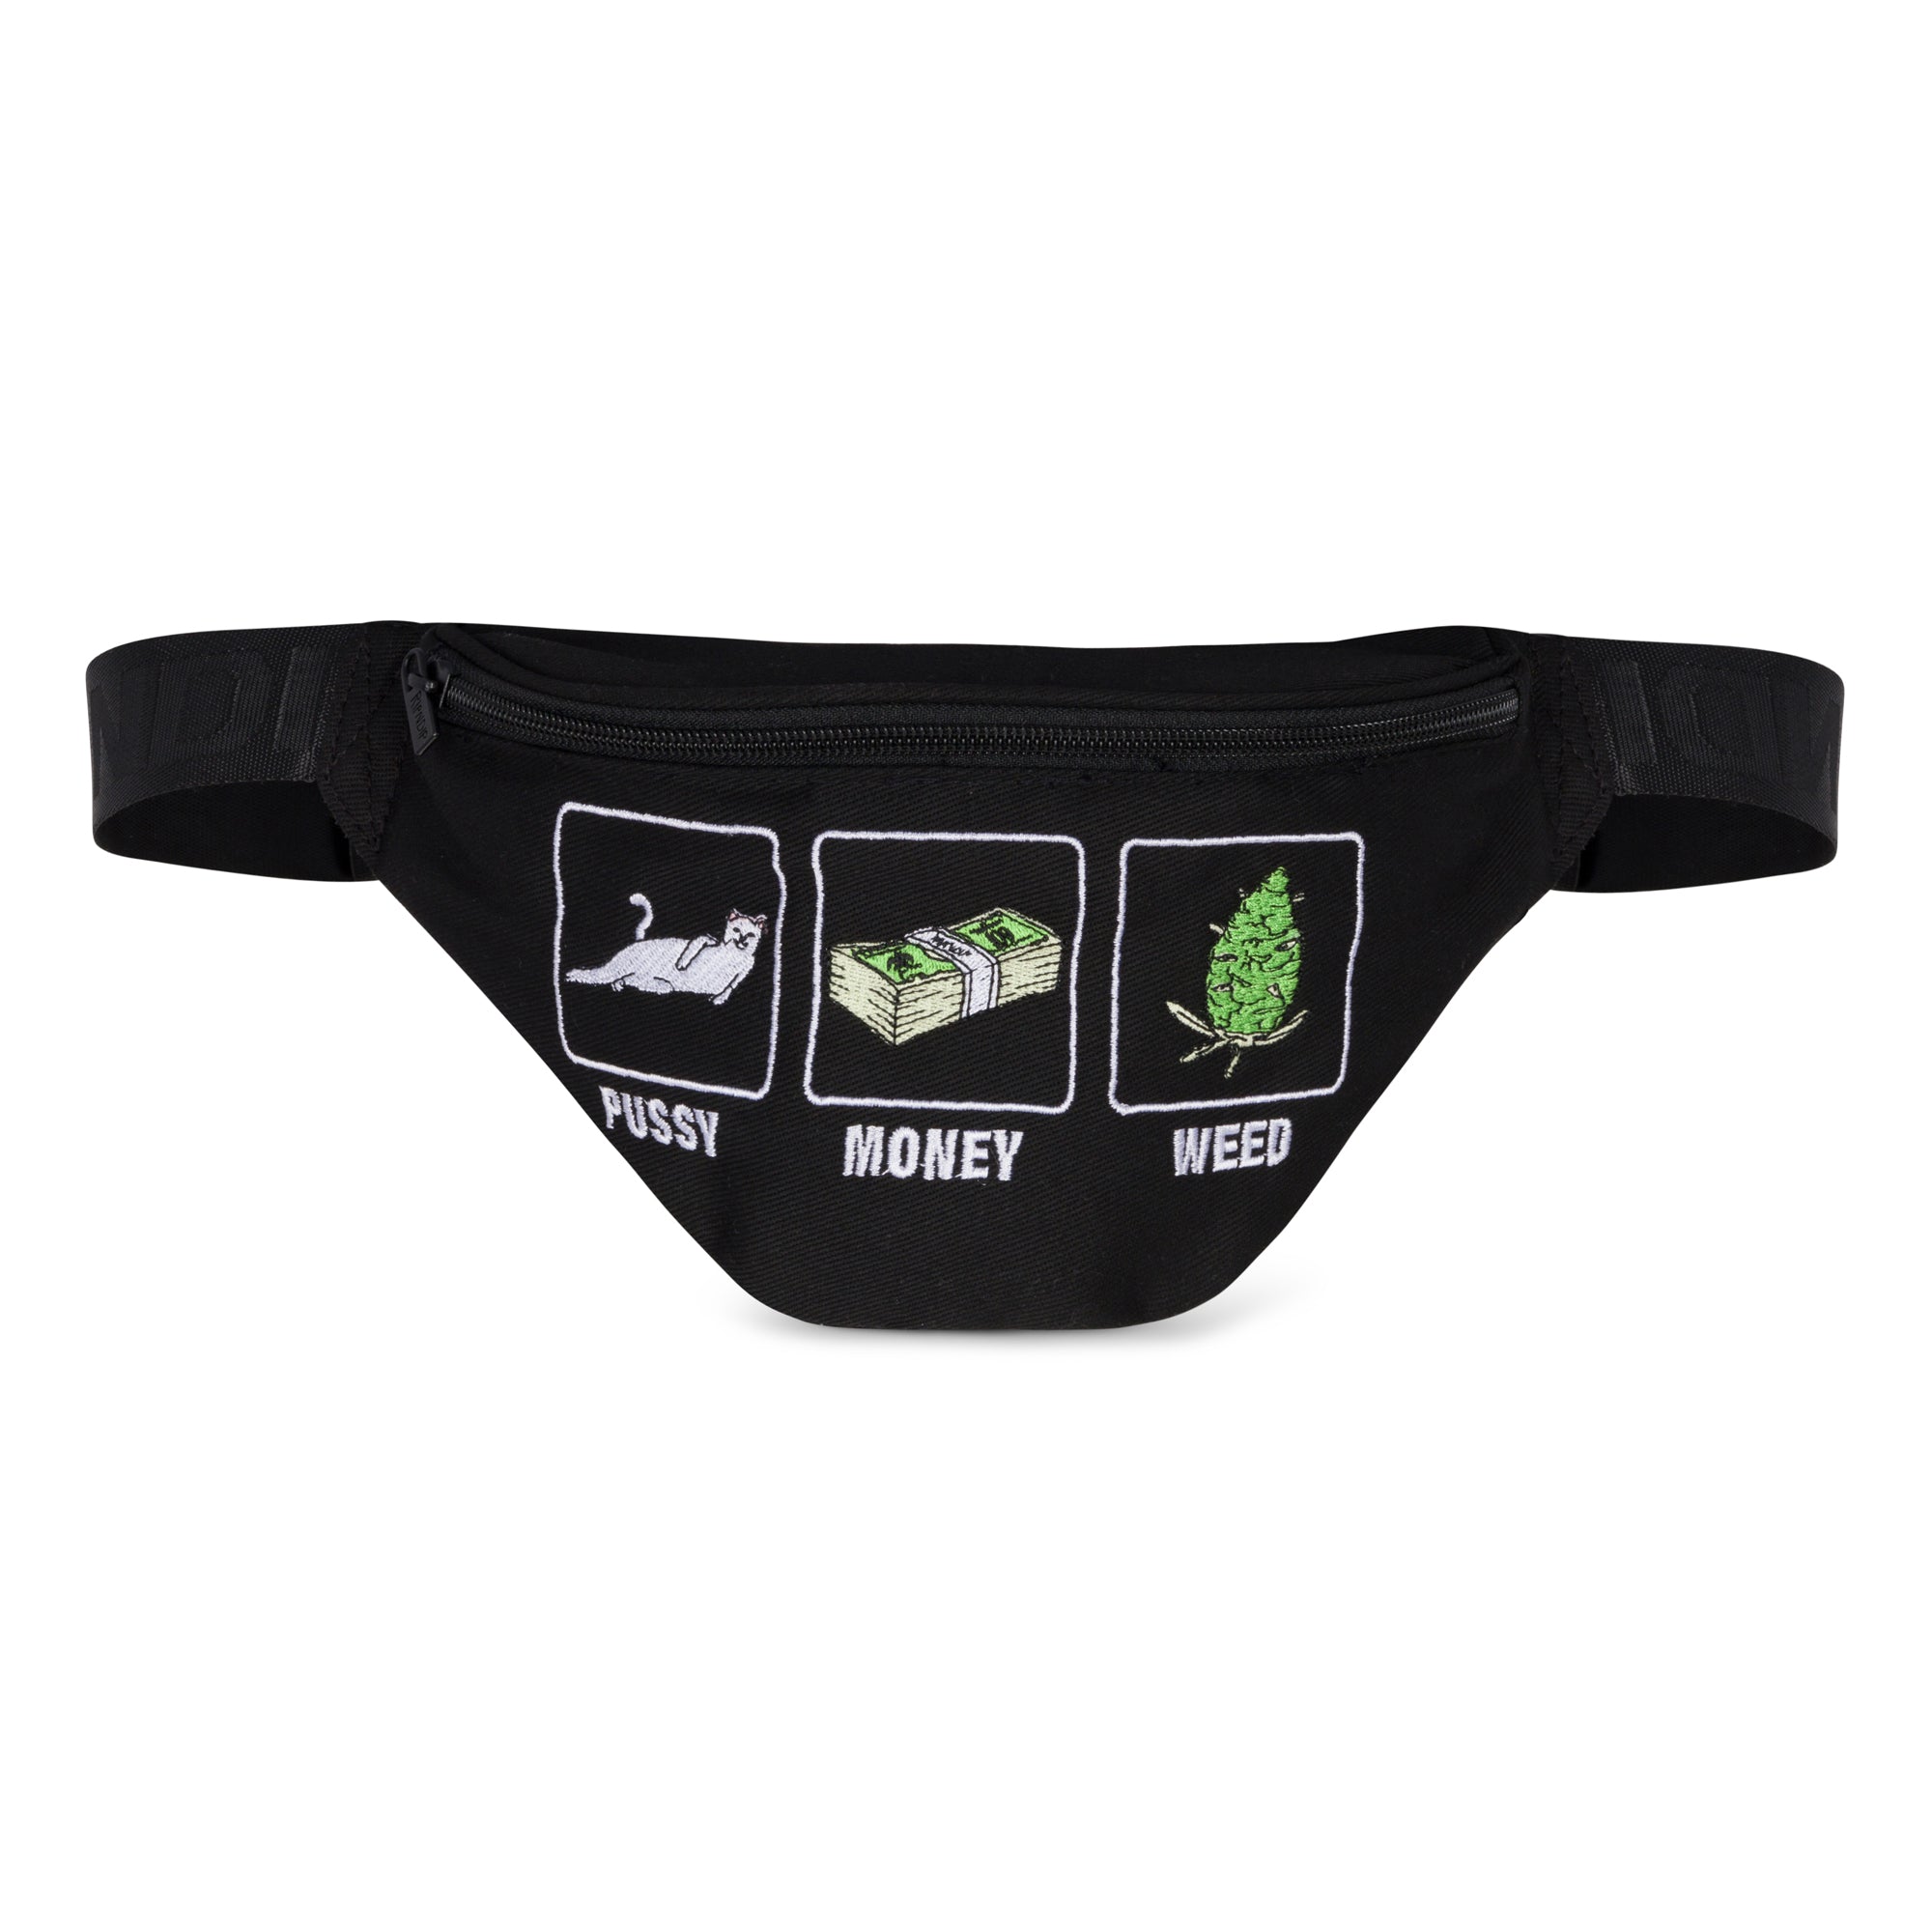 Pussy Money Weed Fanny Pack (Black)